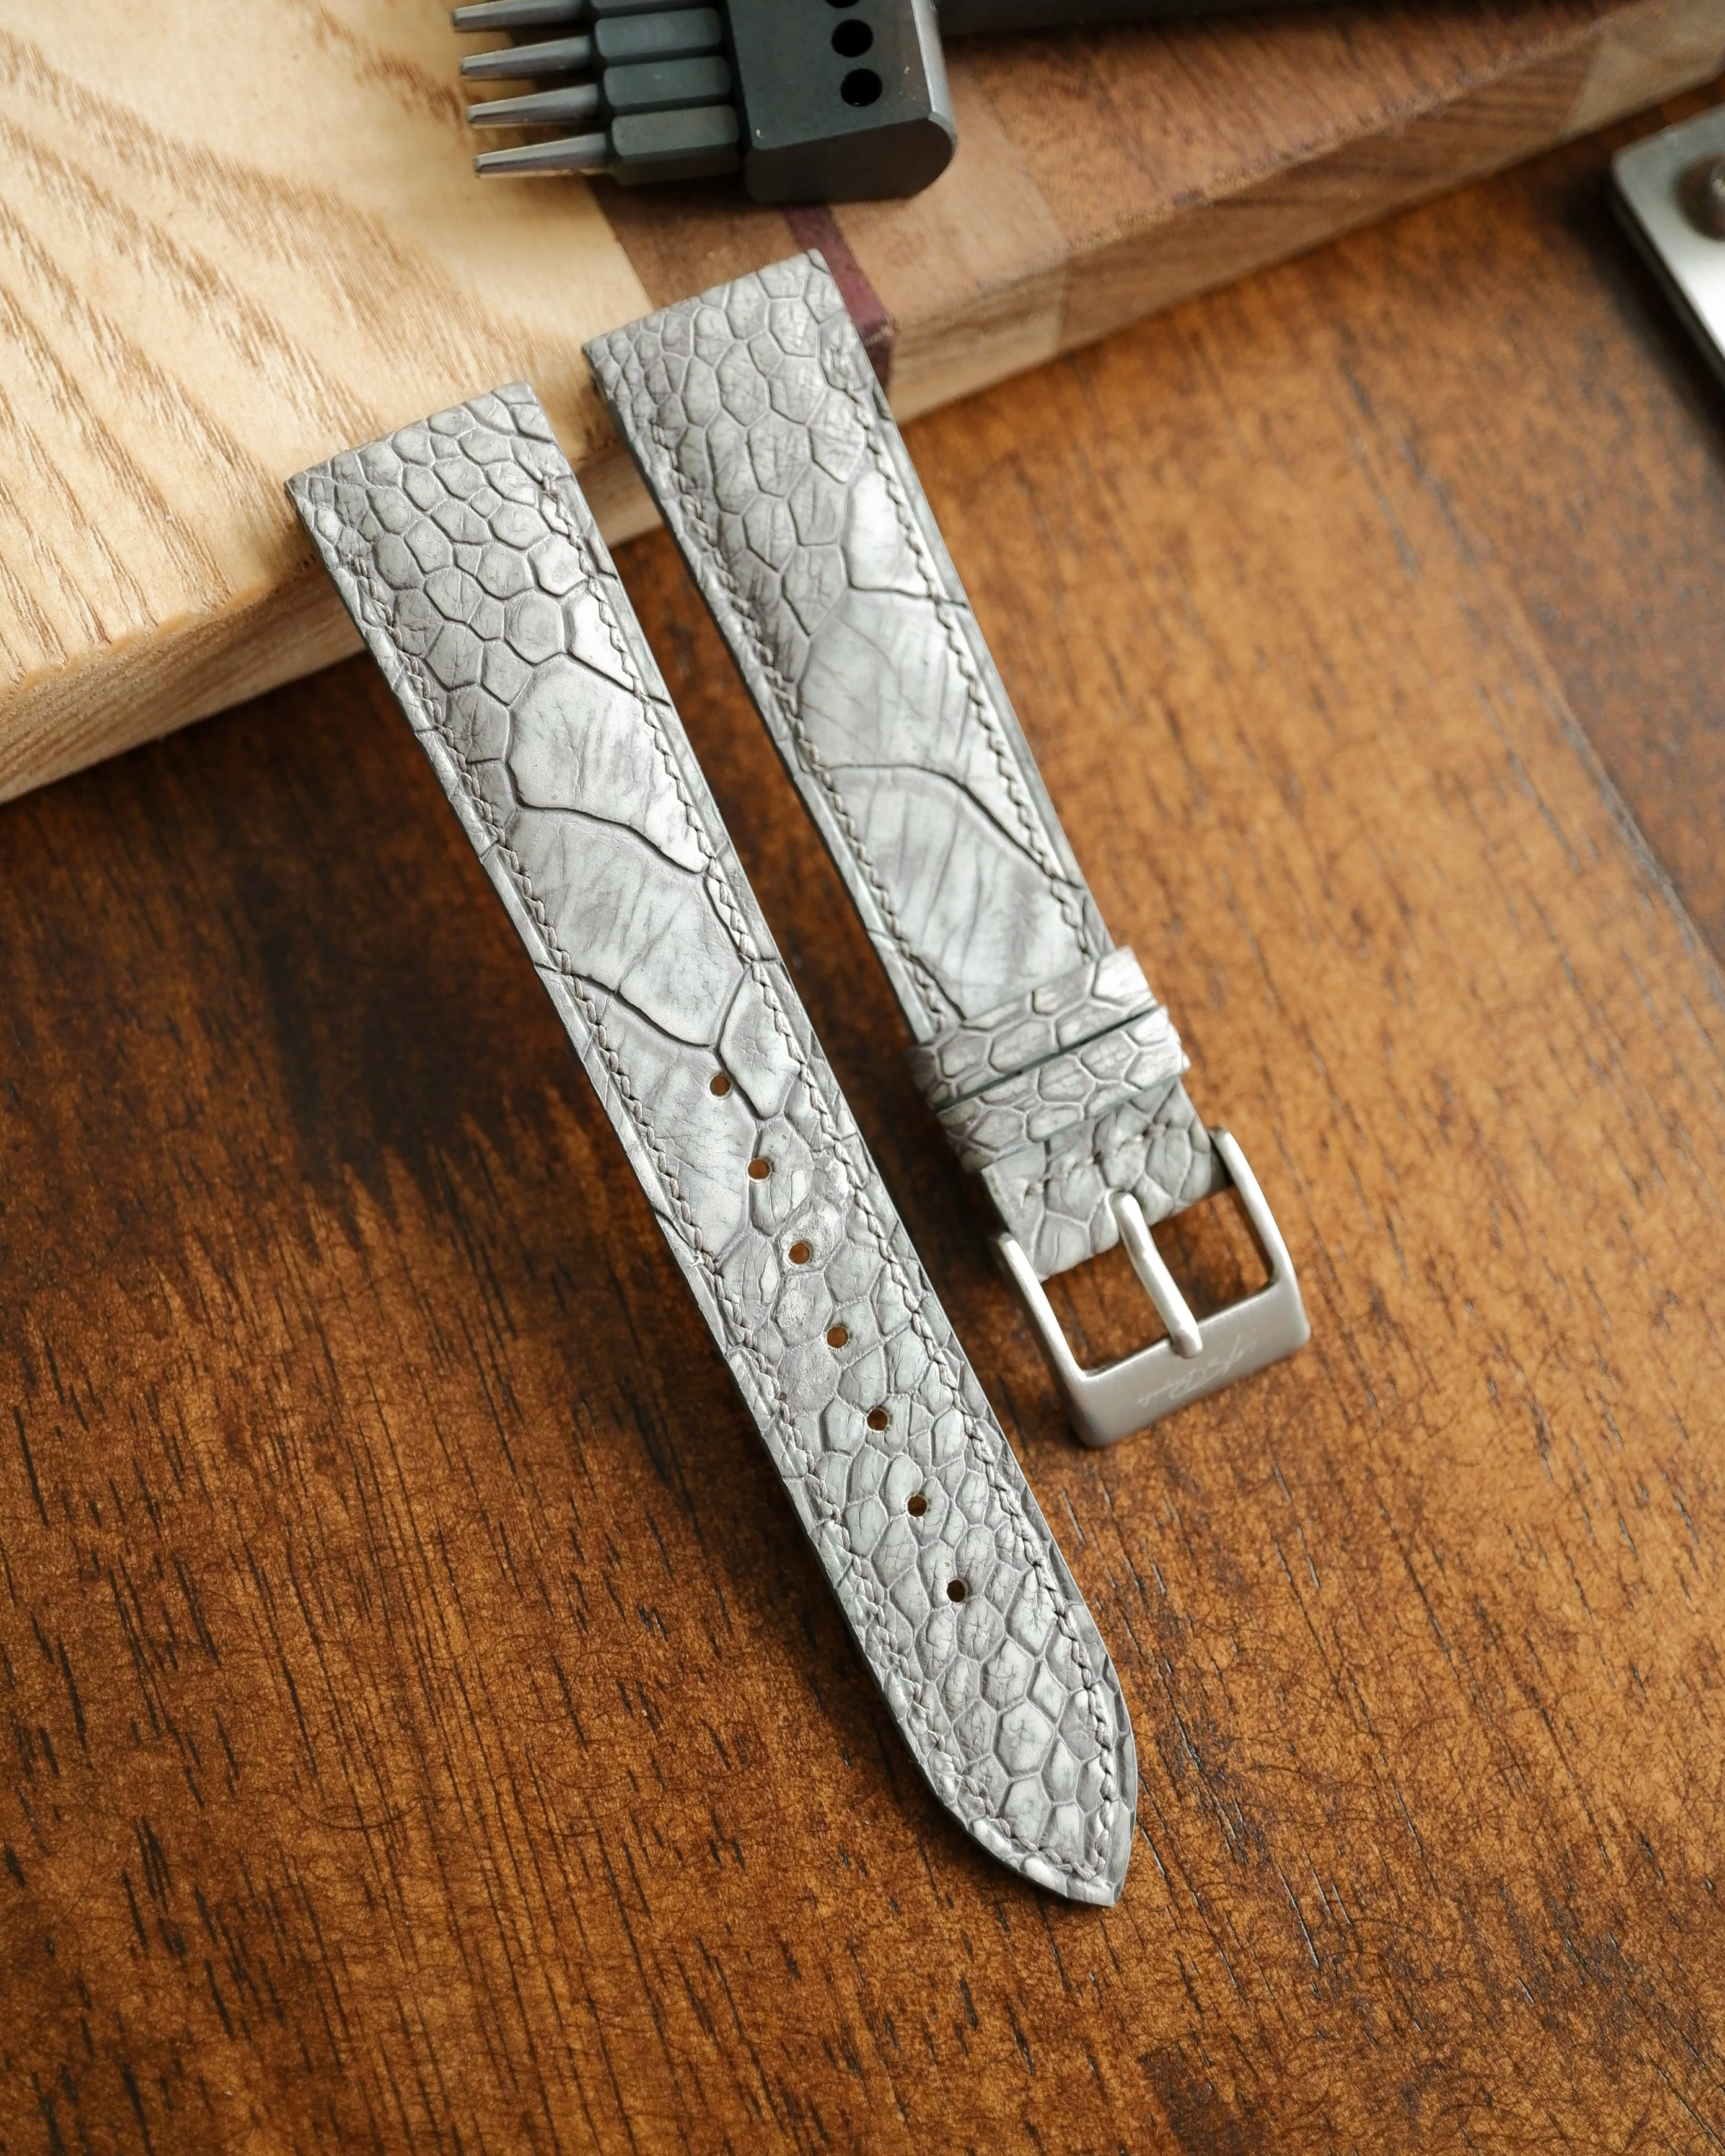 Ready Made - Stoned Grey Ostrich Leg Leather Watch Strap for Cartier Santos Dumont